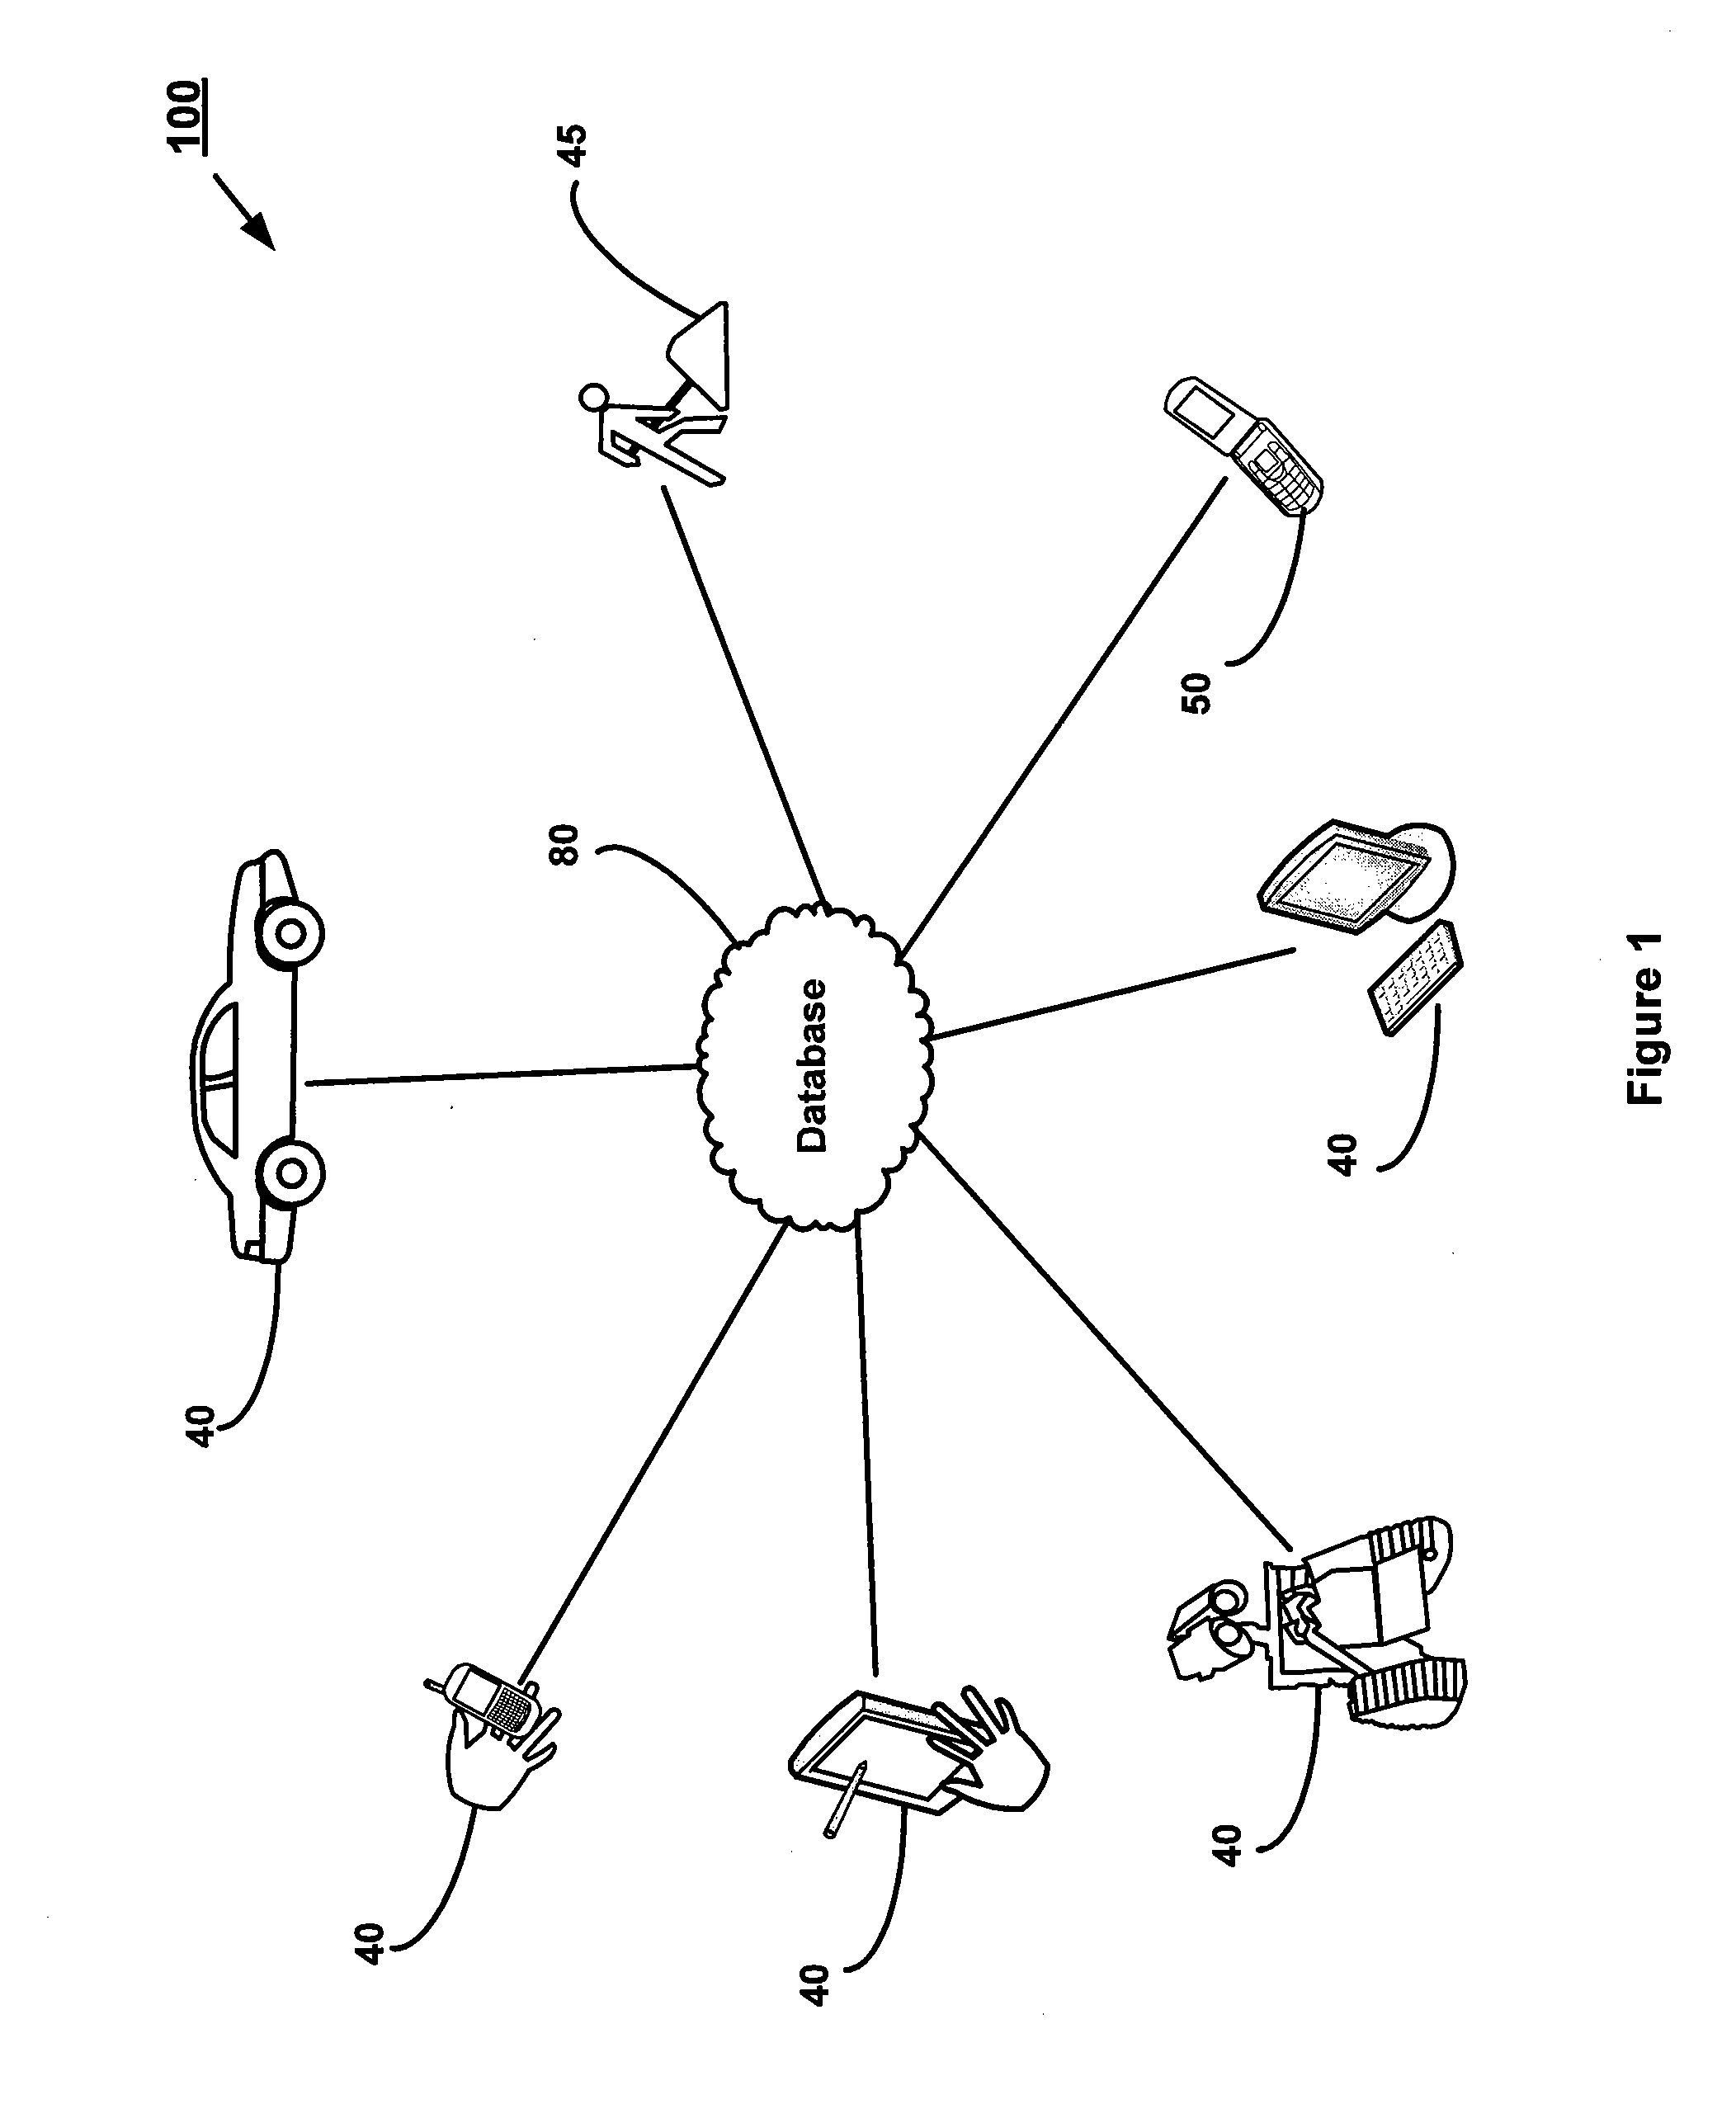 System and method for hazard detection and sharing